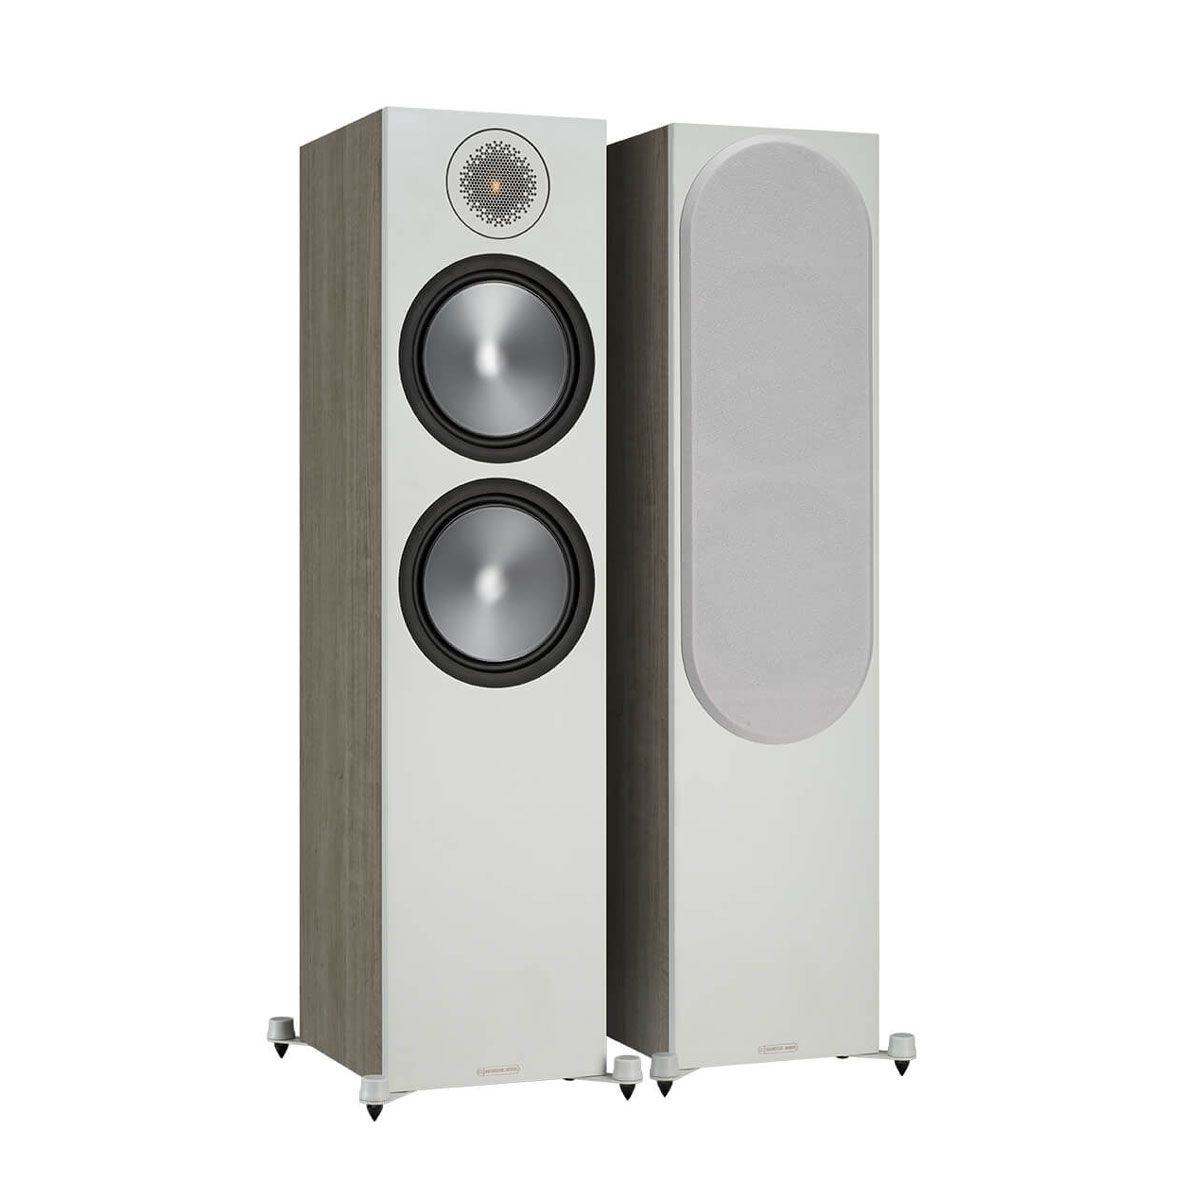 Monitor Audio Bronze 500 Floorstanding Speakers, Urban Grey, set of two, one with grille and one without grille